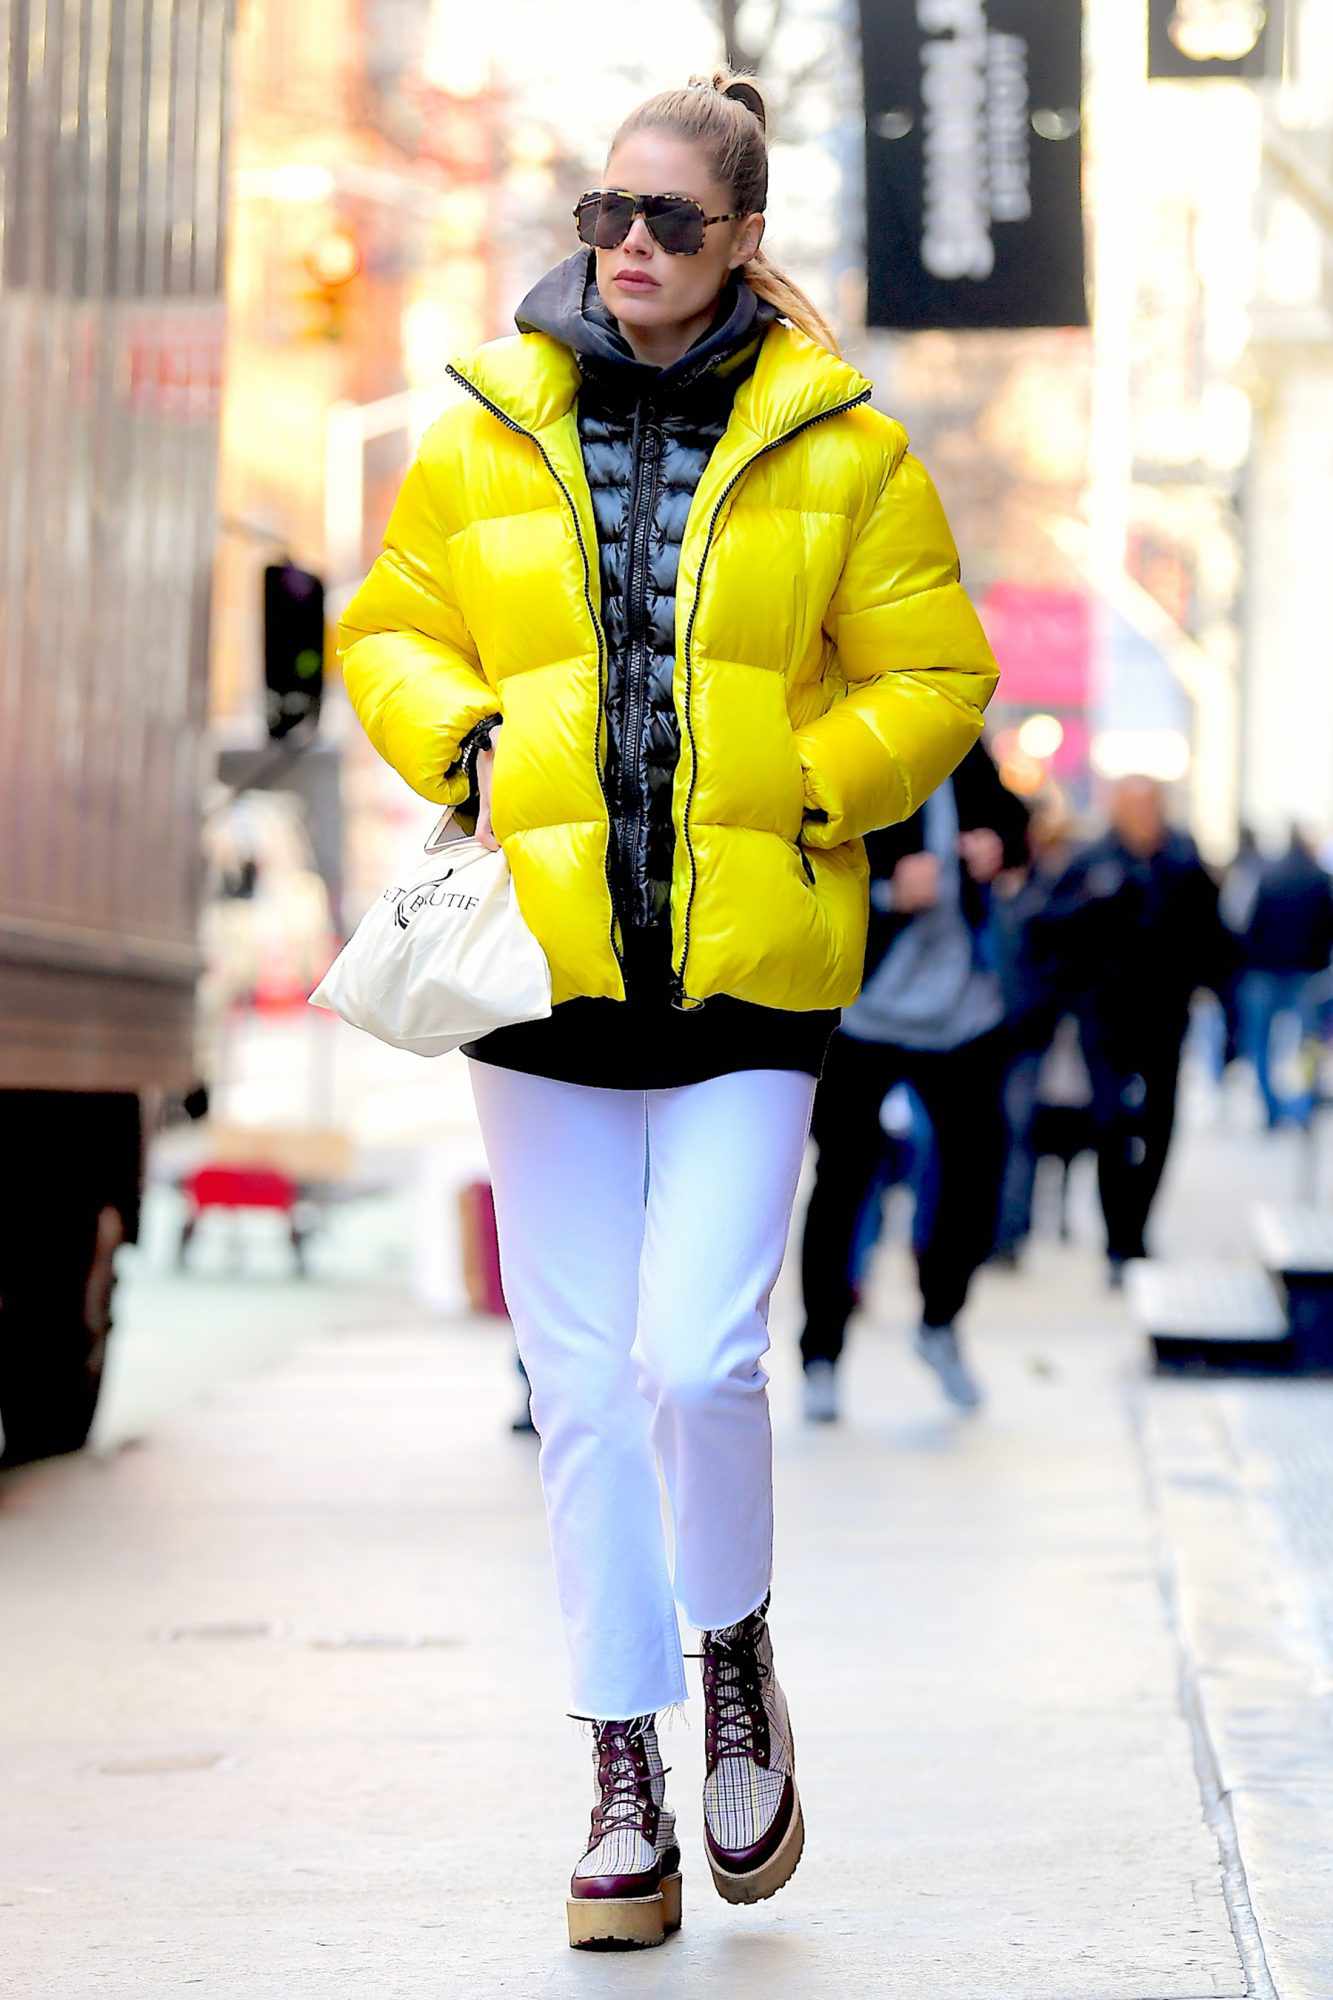 EXCLUSIVE: Doutzen Kroes Wears Bright Yellow Bubble Jacket while Shopping in Soho